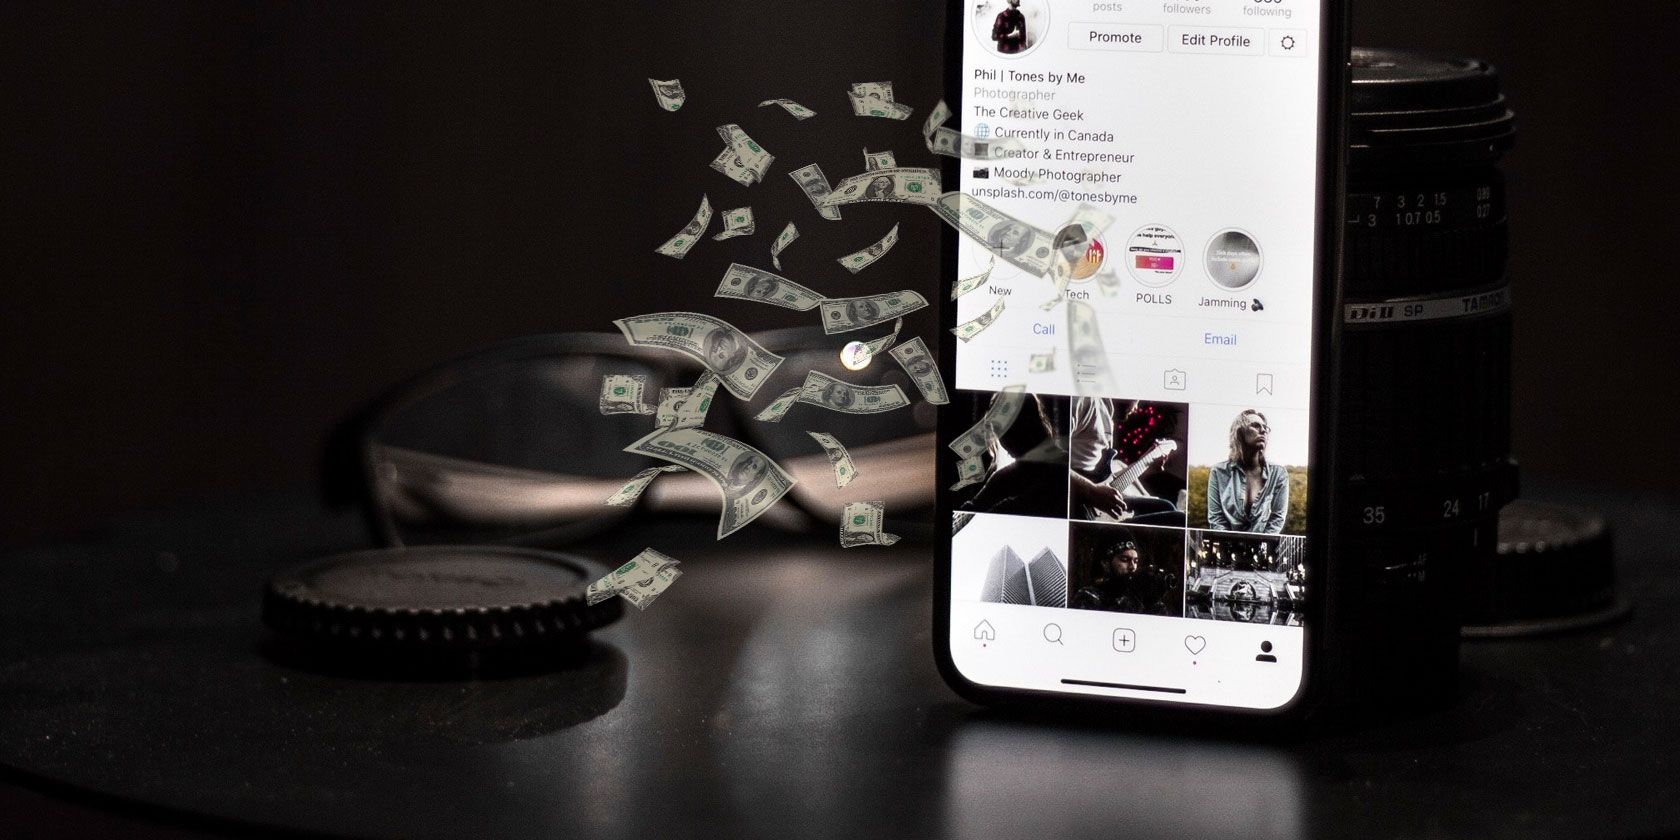 How To Monetize Your Instagram Account Using Affiliate Marketing